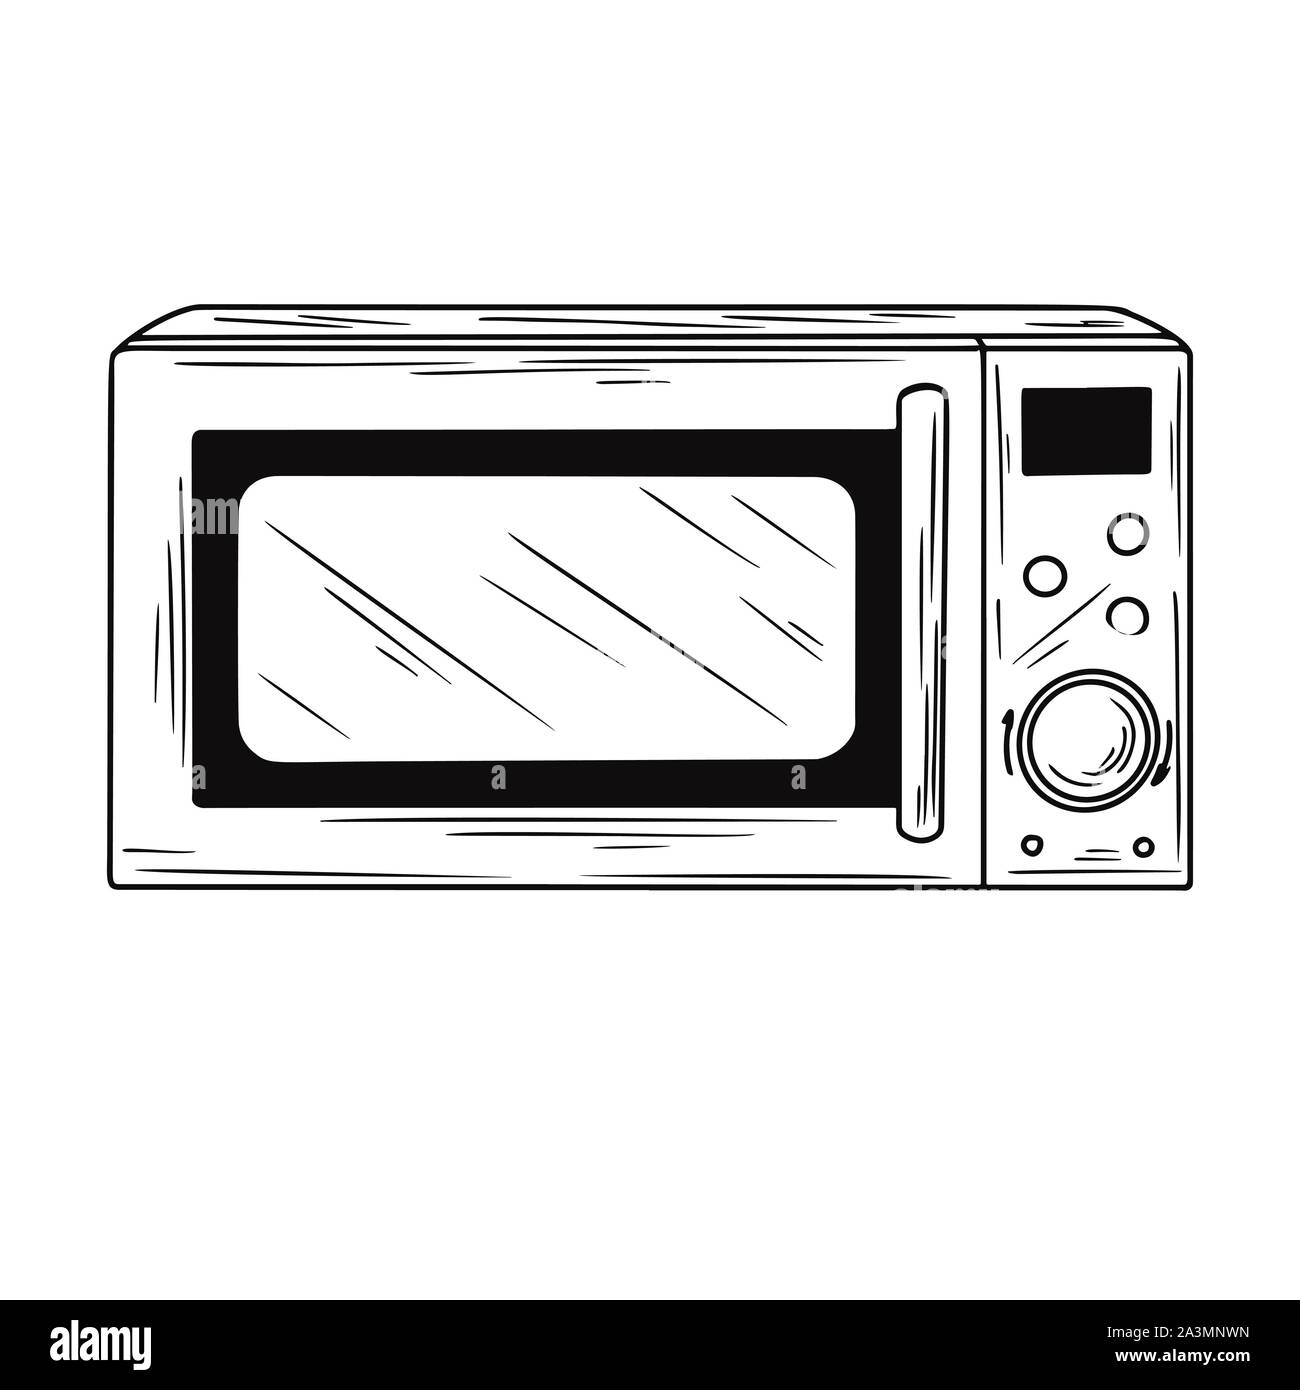 Microwave Oven Vector Sketch Illustration Stock Vector Royalty Free  1642627939  Shutterstock